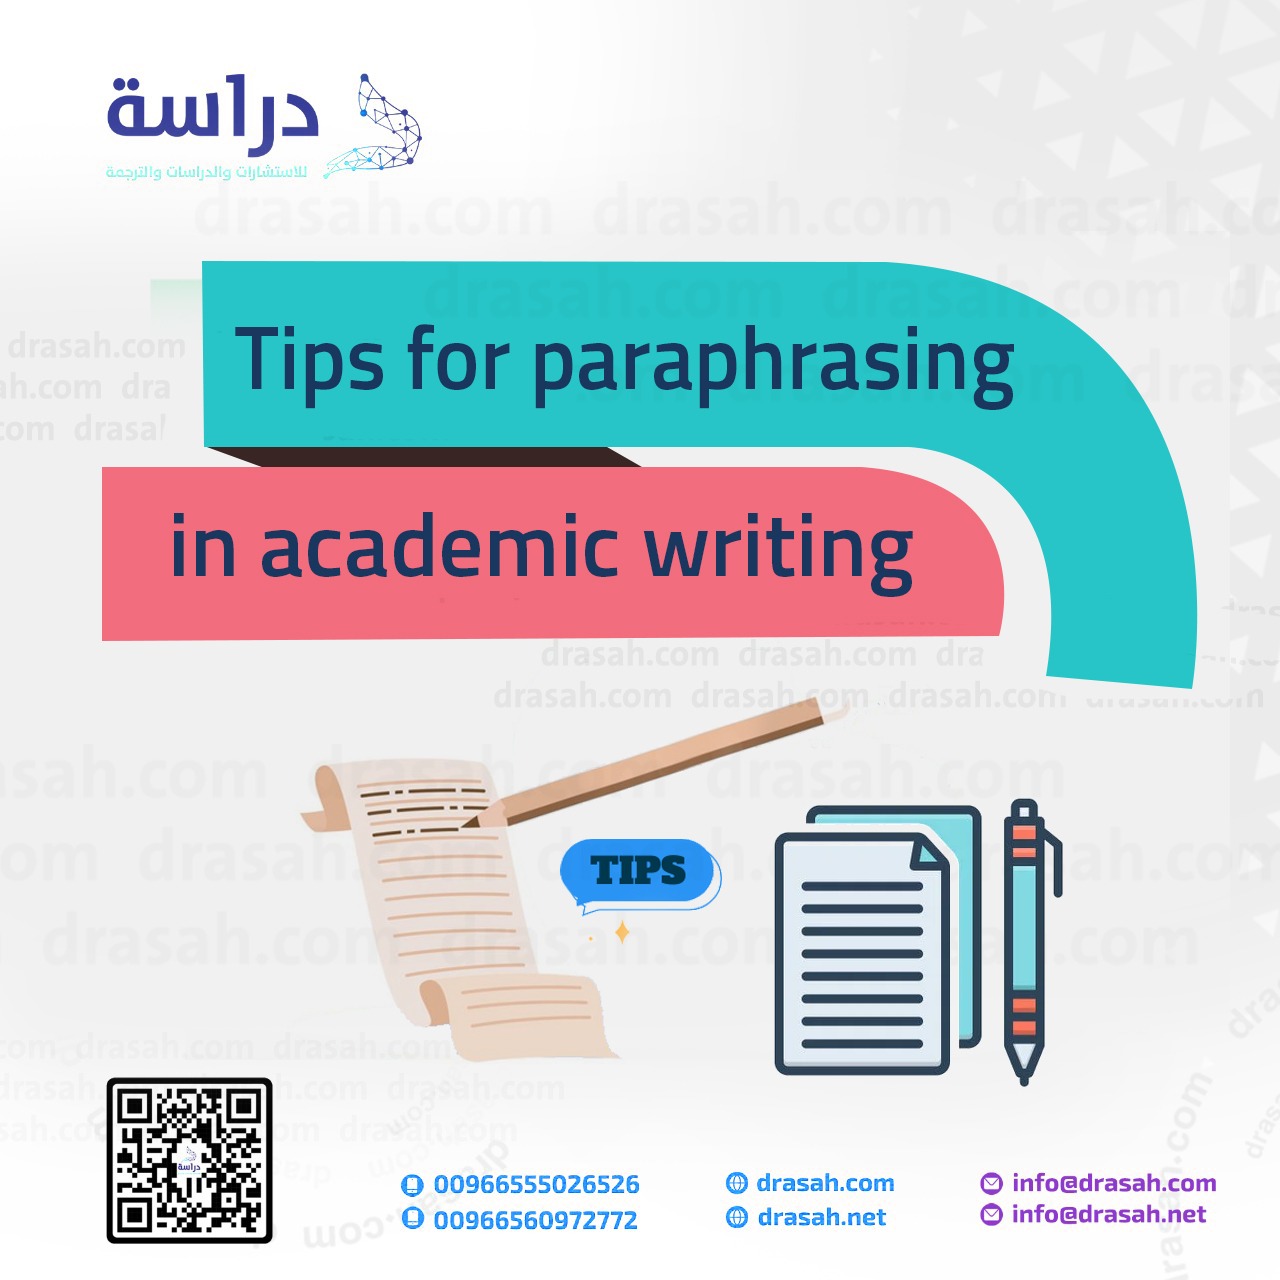 Tips for paraphrasing in academic writing